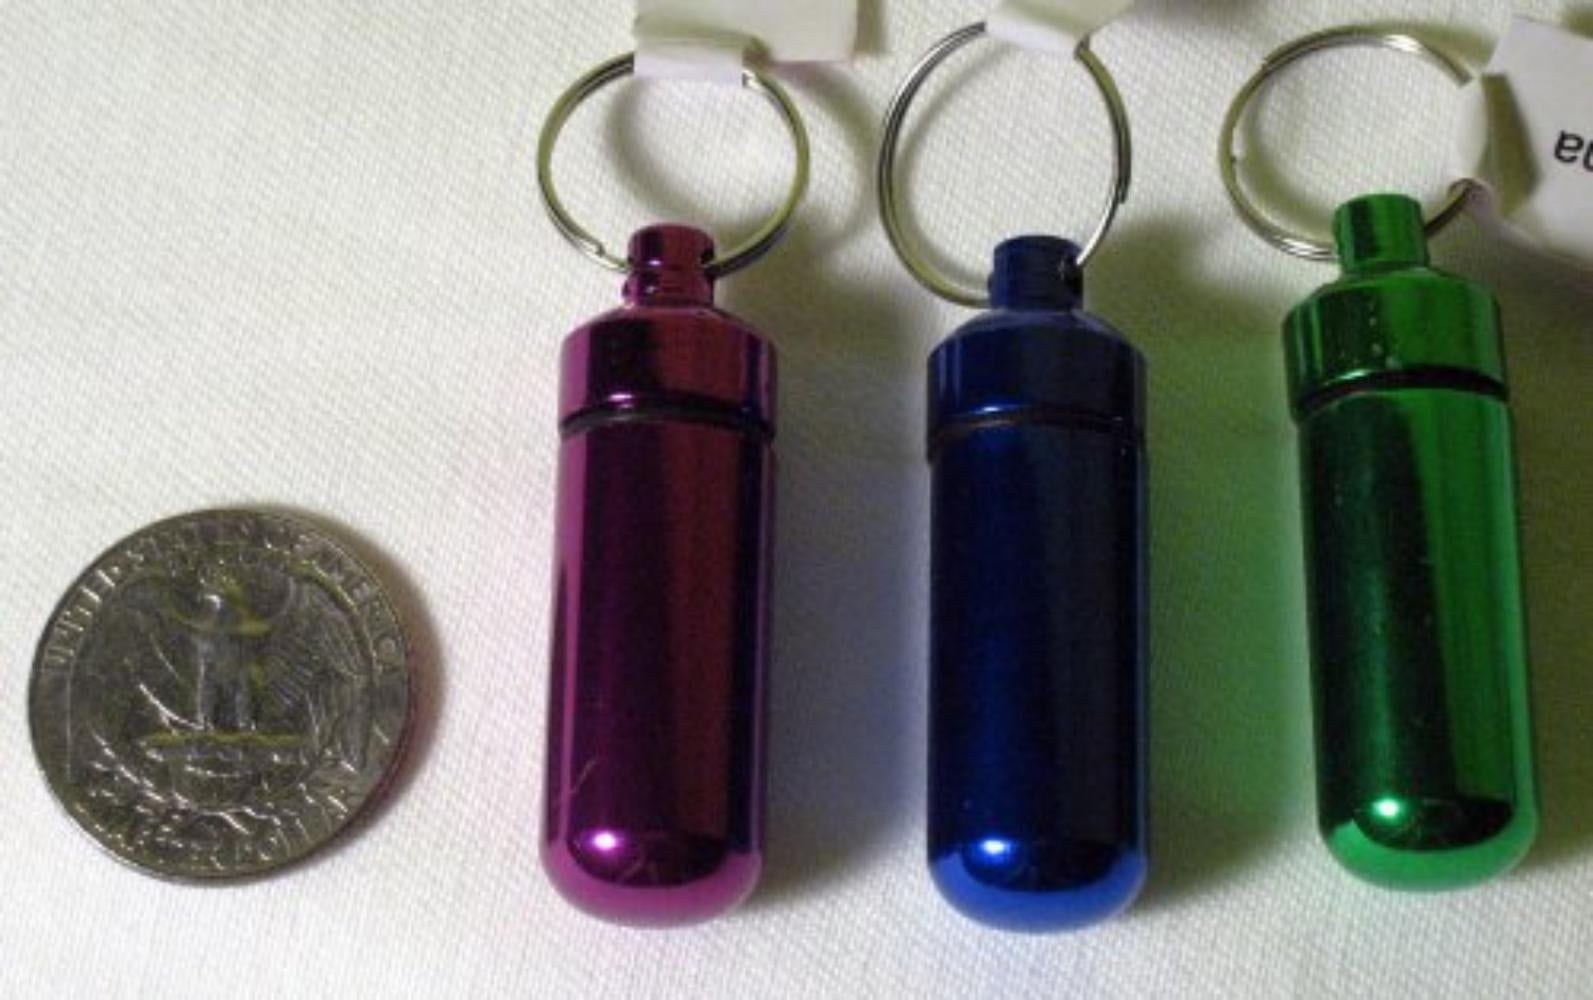 6 Bison Tubes Geocaching Micro Cache Logs Geocache Containers Id Pill Holder Fun 